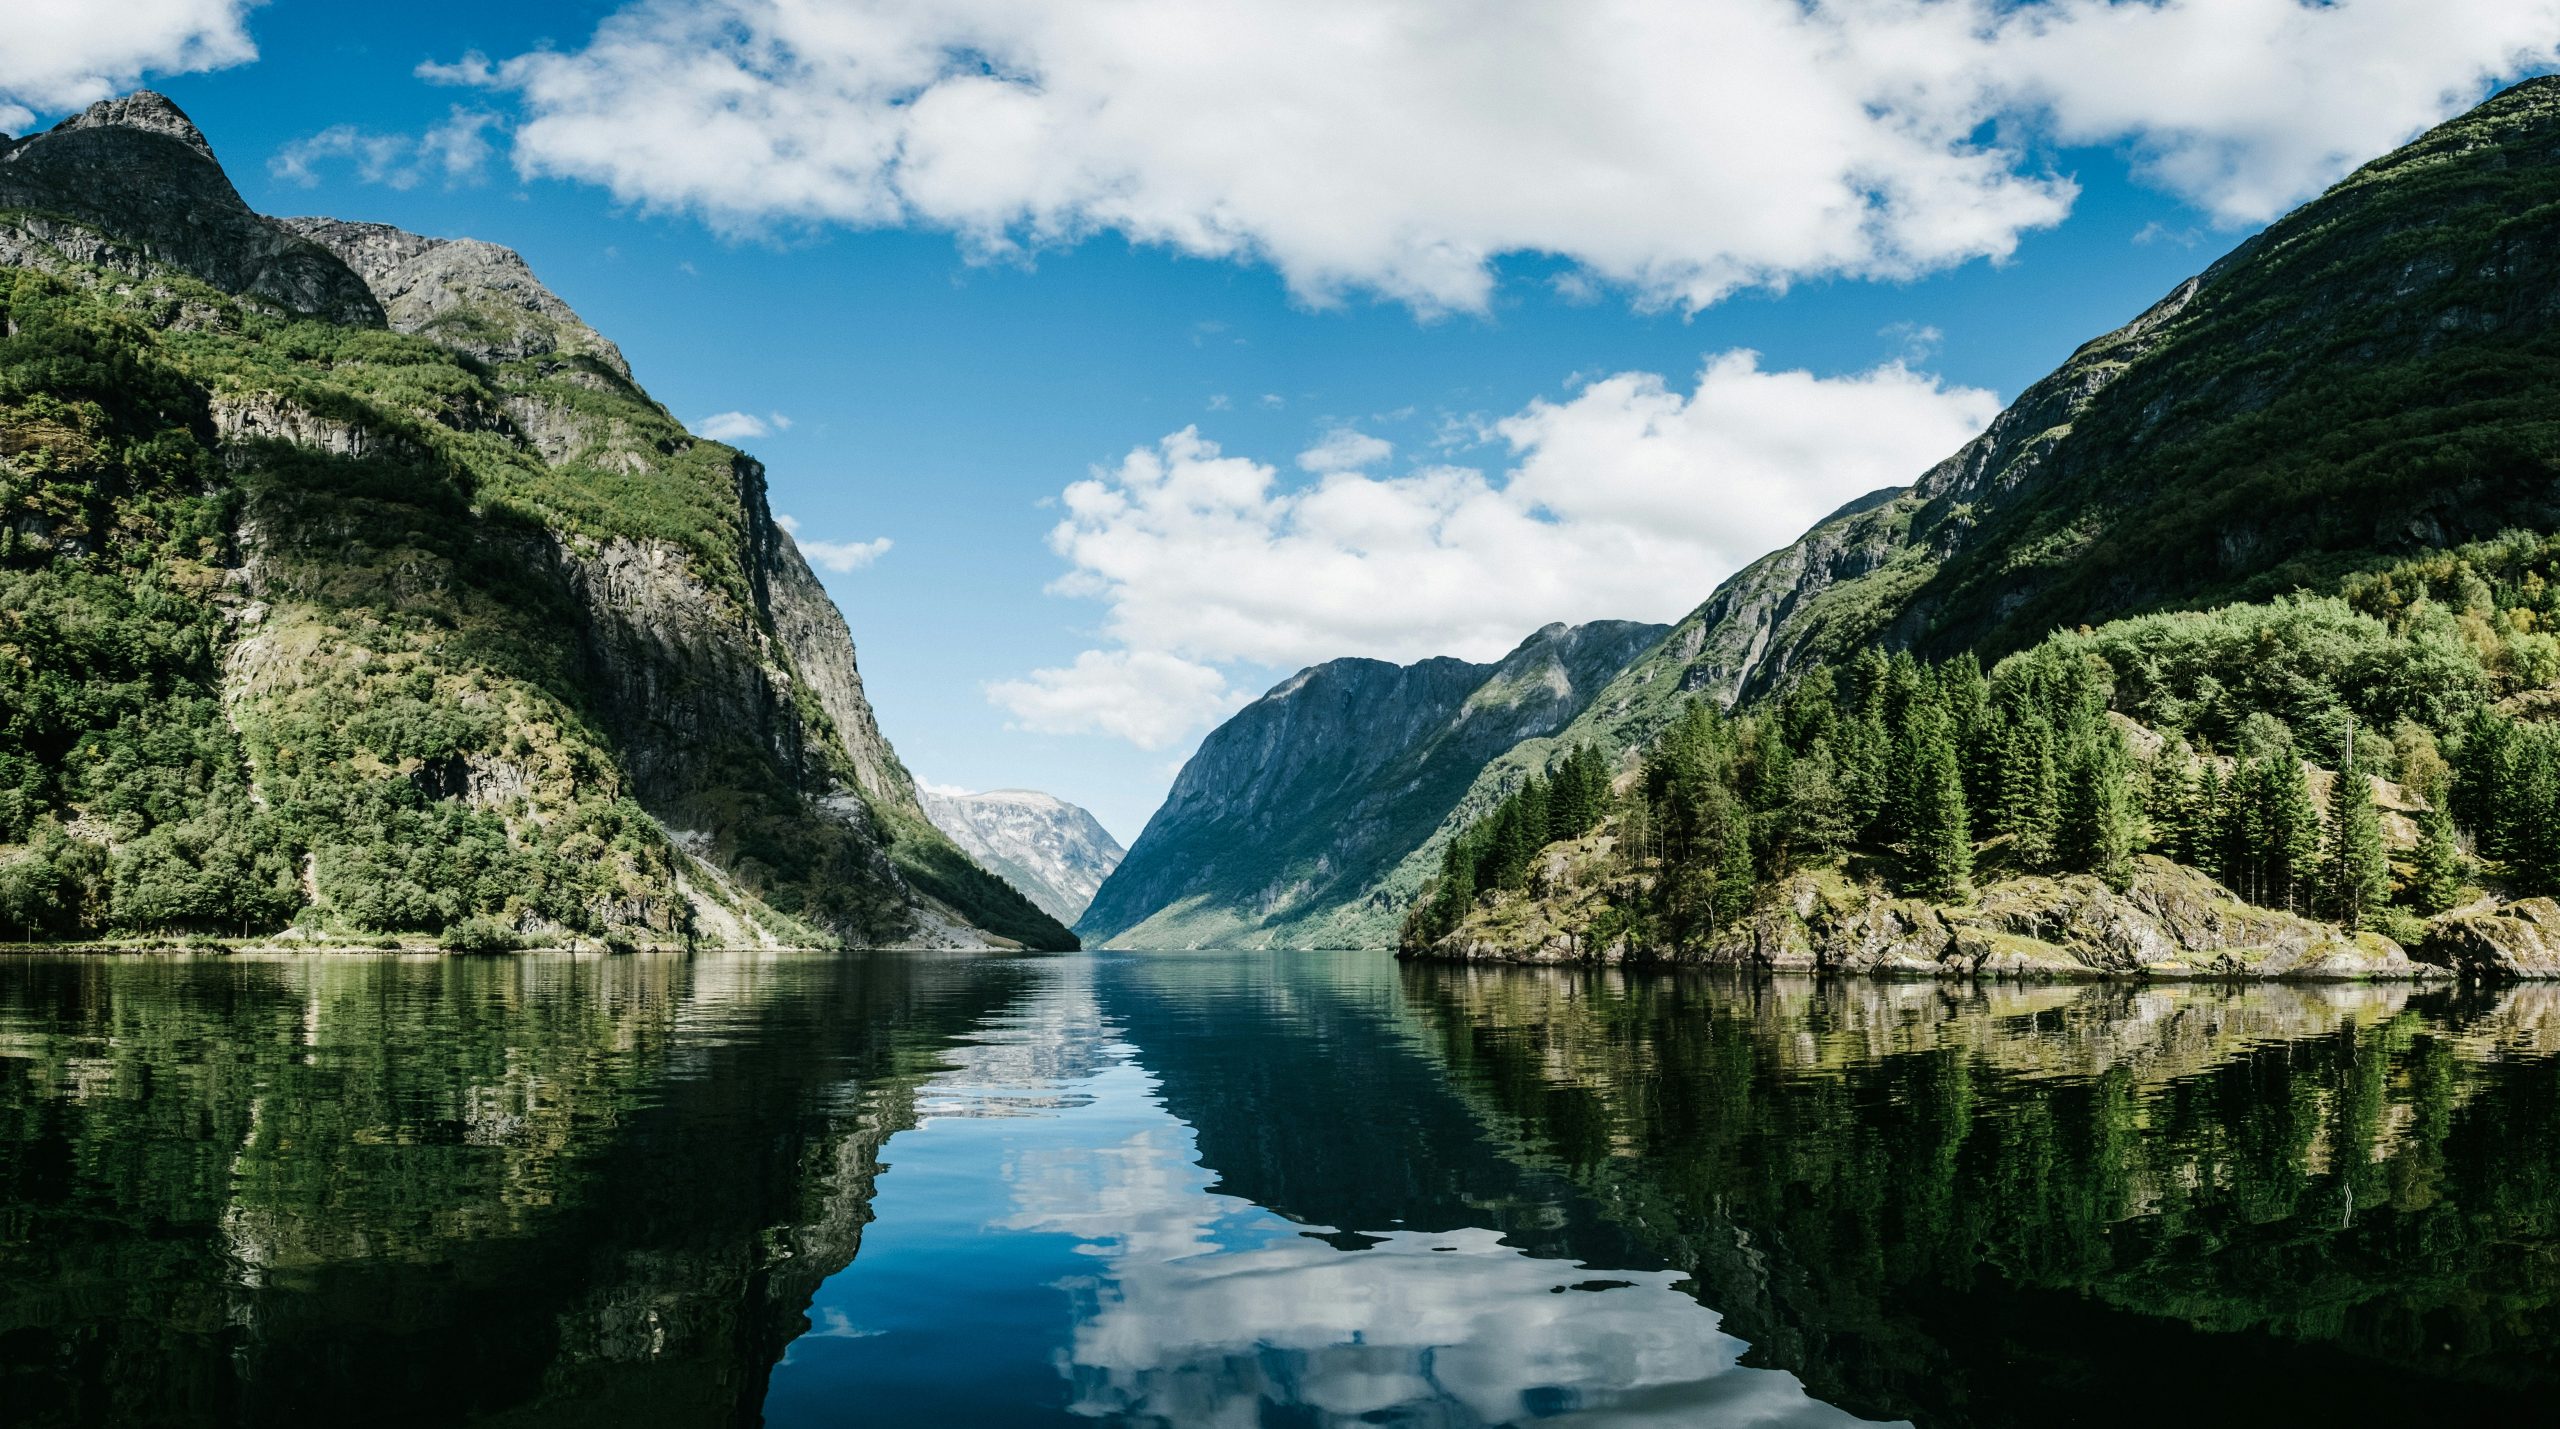 explore the breathtaking fjords and stunning natural beauty of fjords in this incredible travel destination.